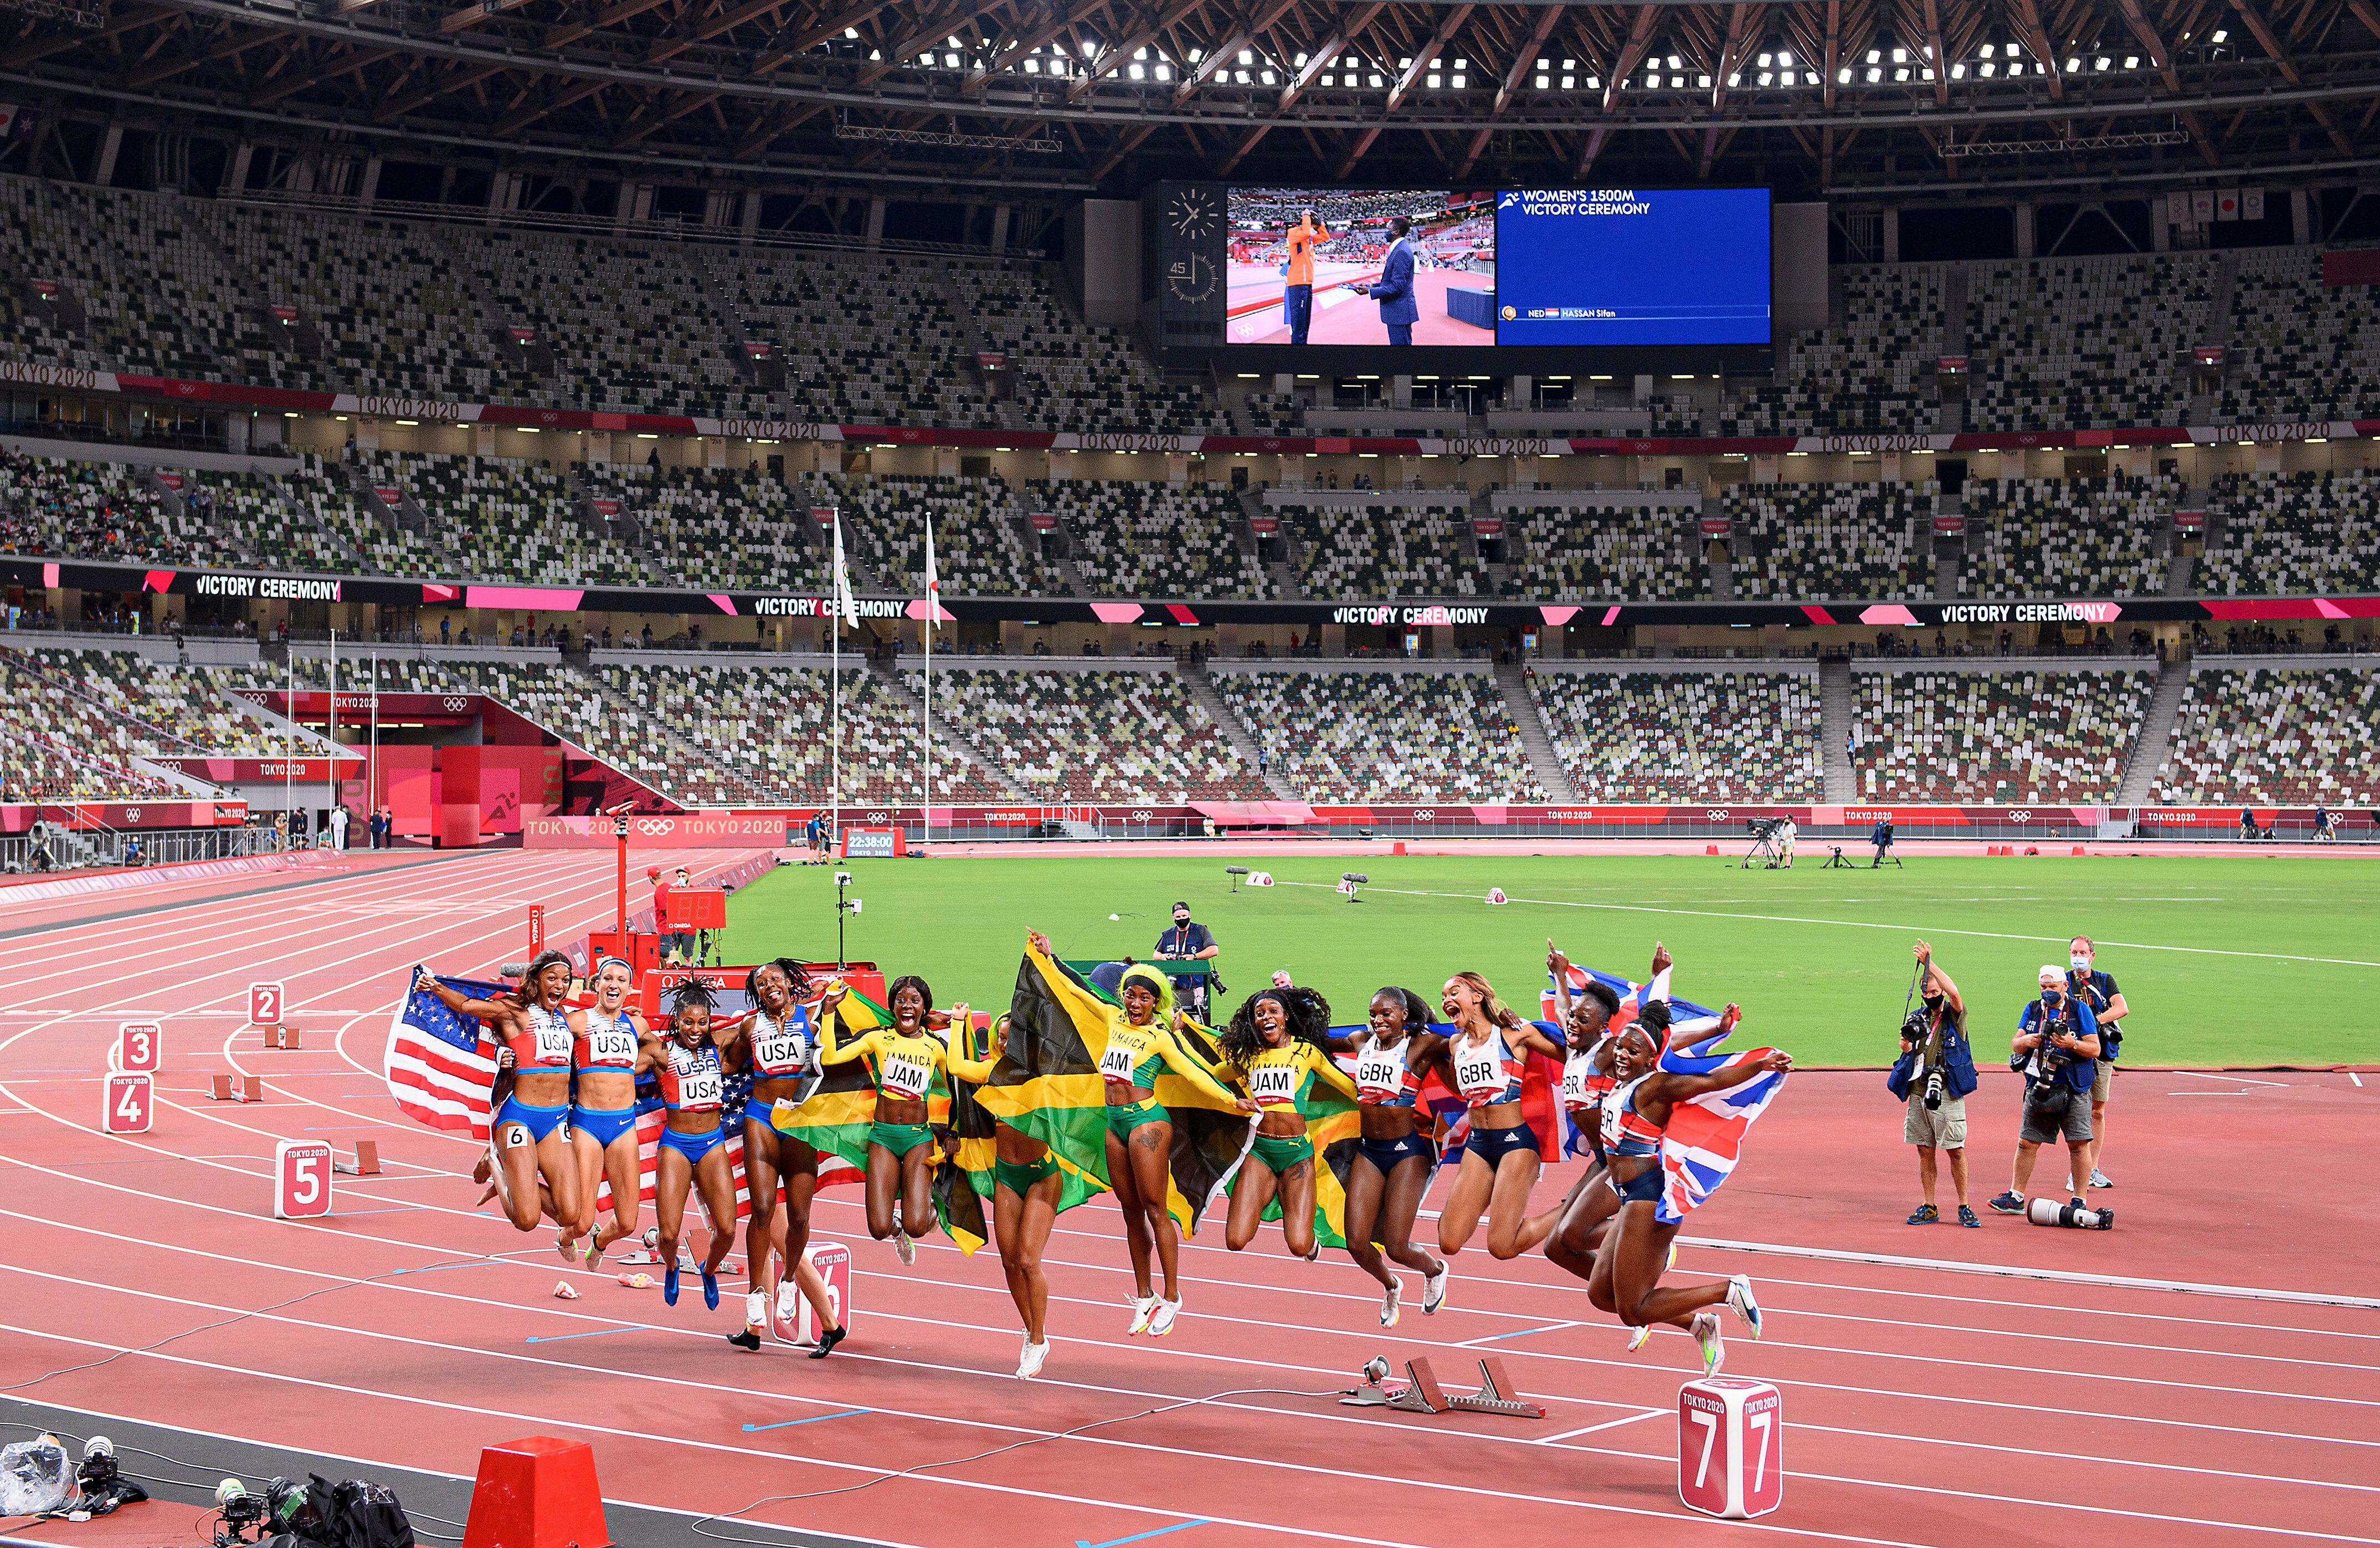 Our guide to the World Athletics Championships 2022